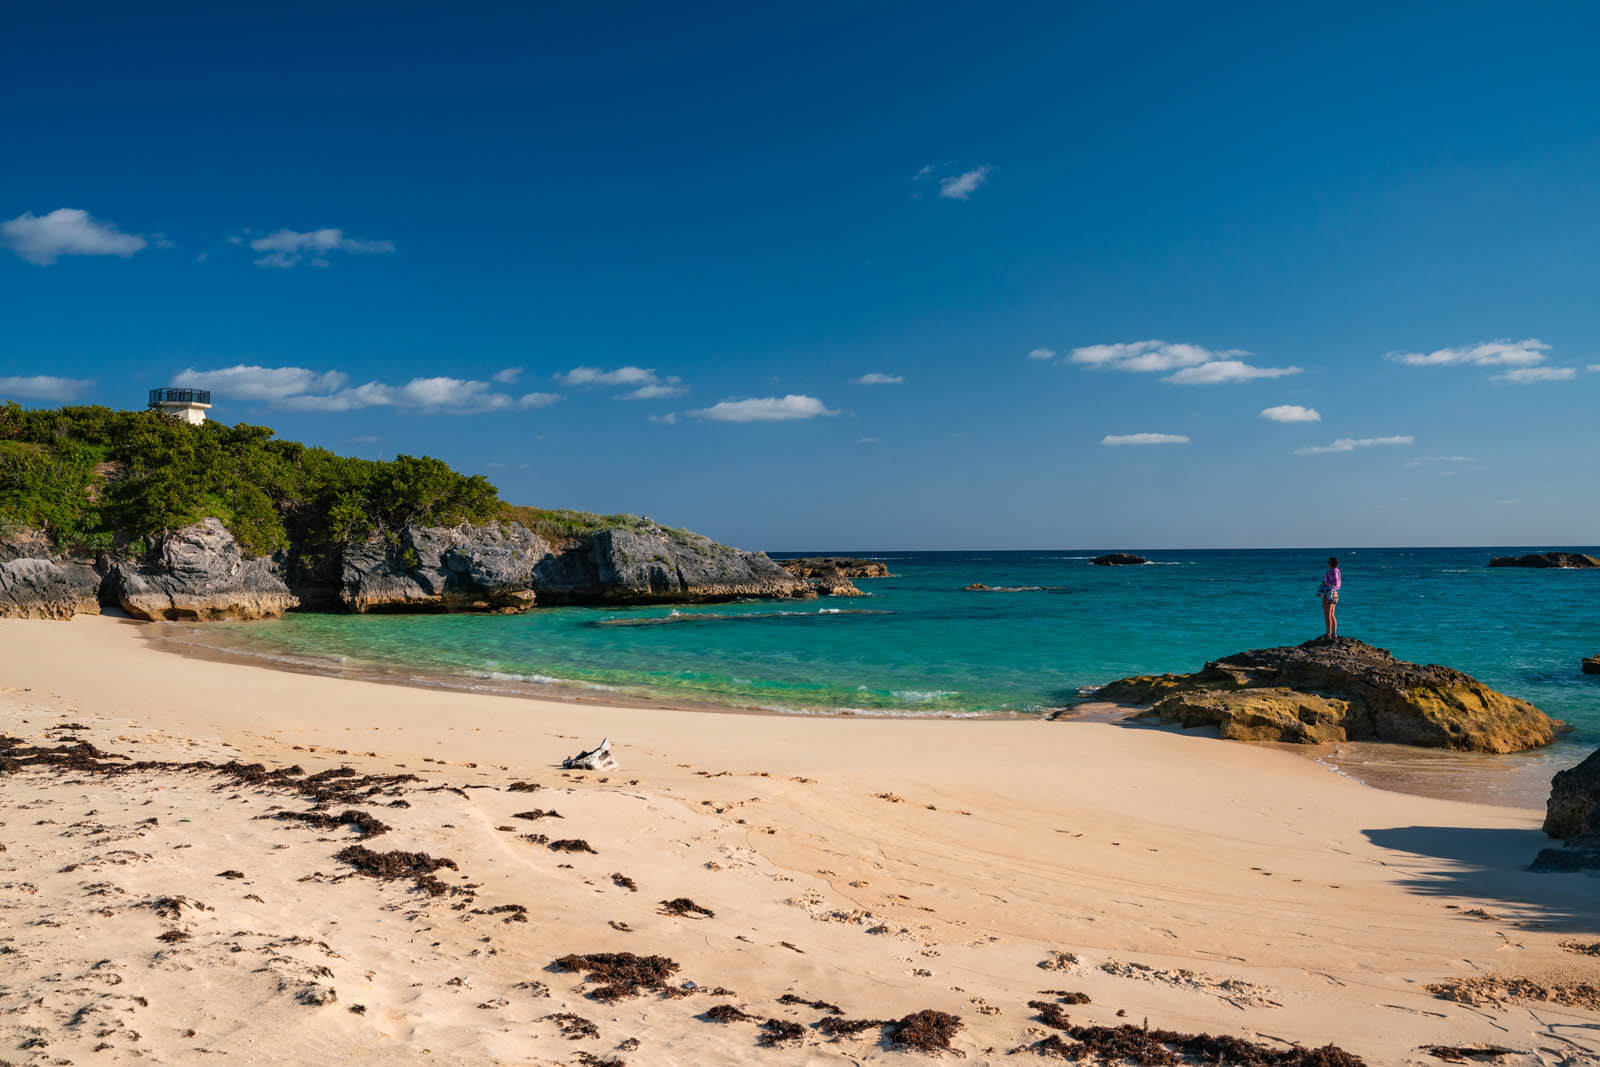 One of the amazing beaches at Coopers Nature Reserve in Bermuda